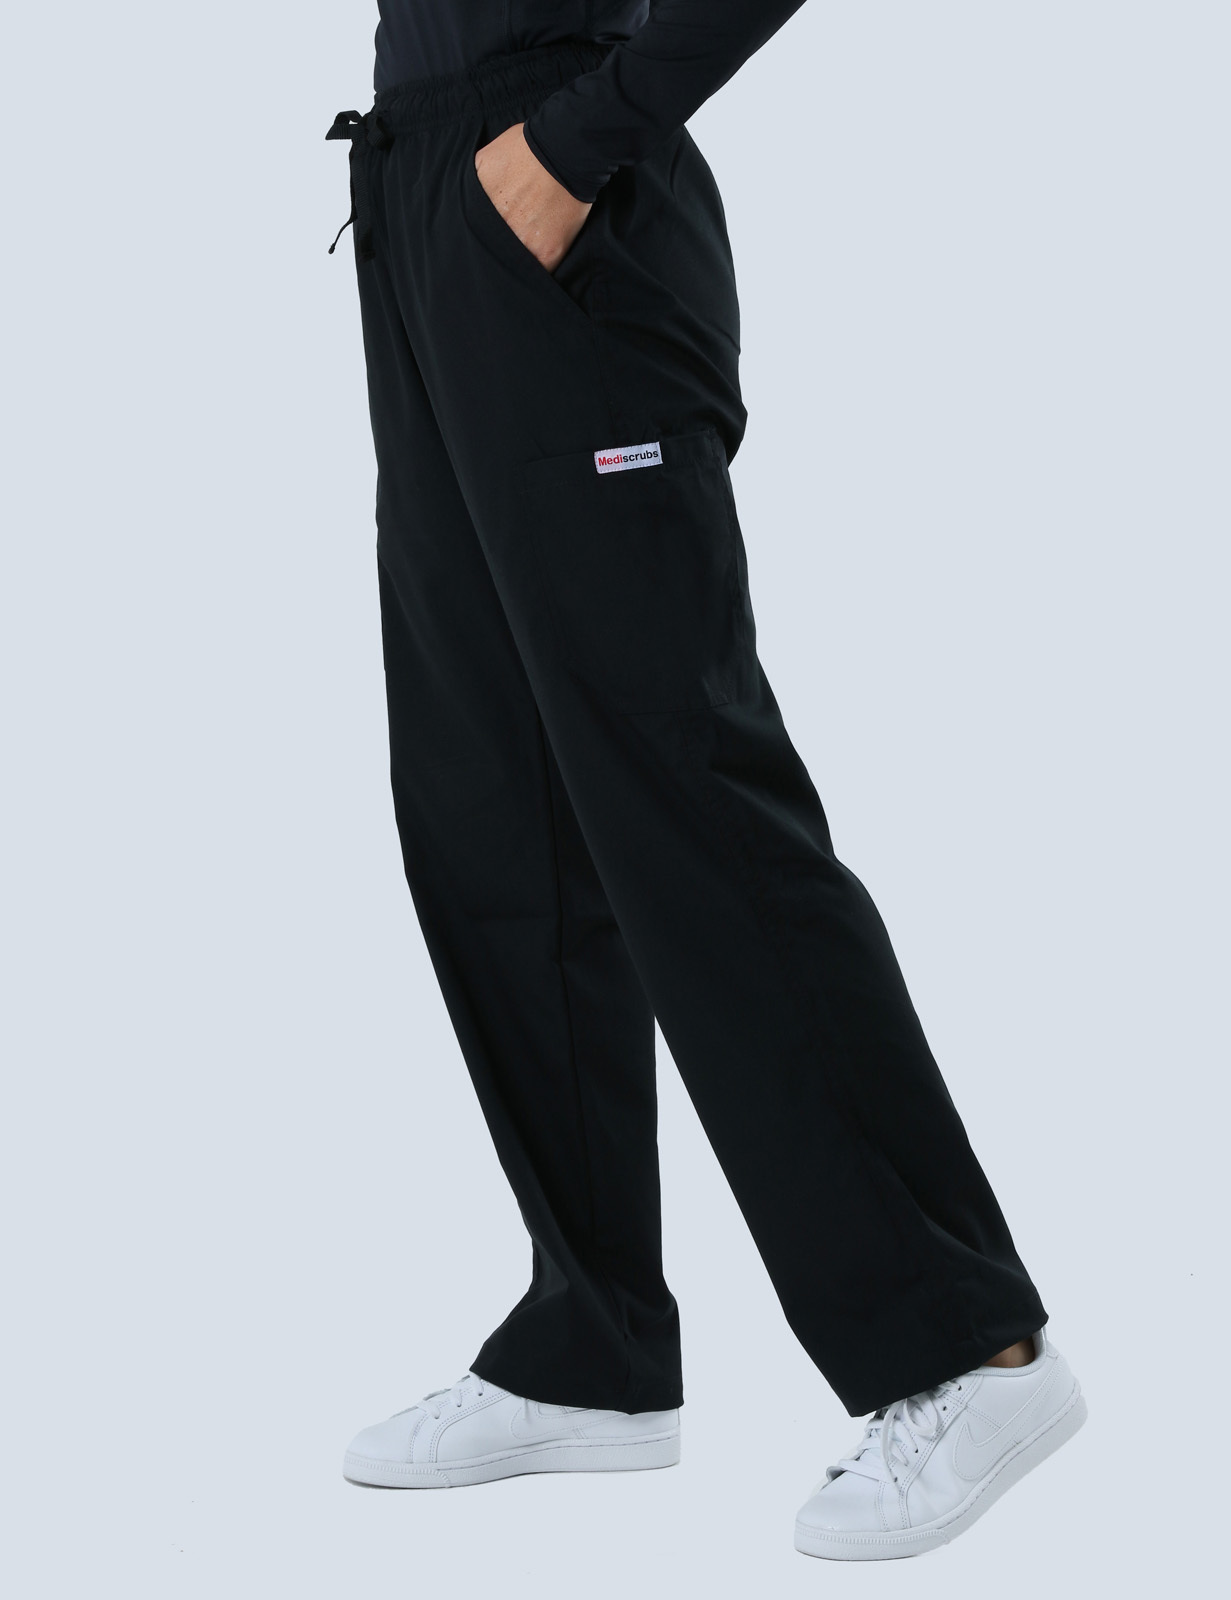 Holmesglen Private Hospital - ED RN (4 Pocket Scrub Top and Cargo Pants in Black incl Logos)